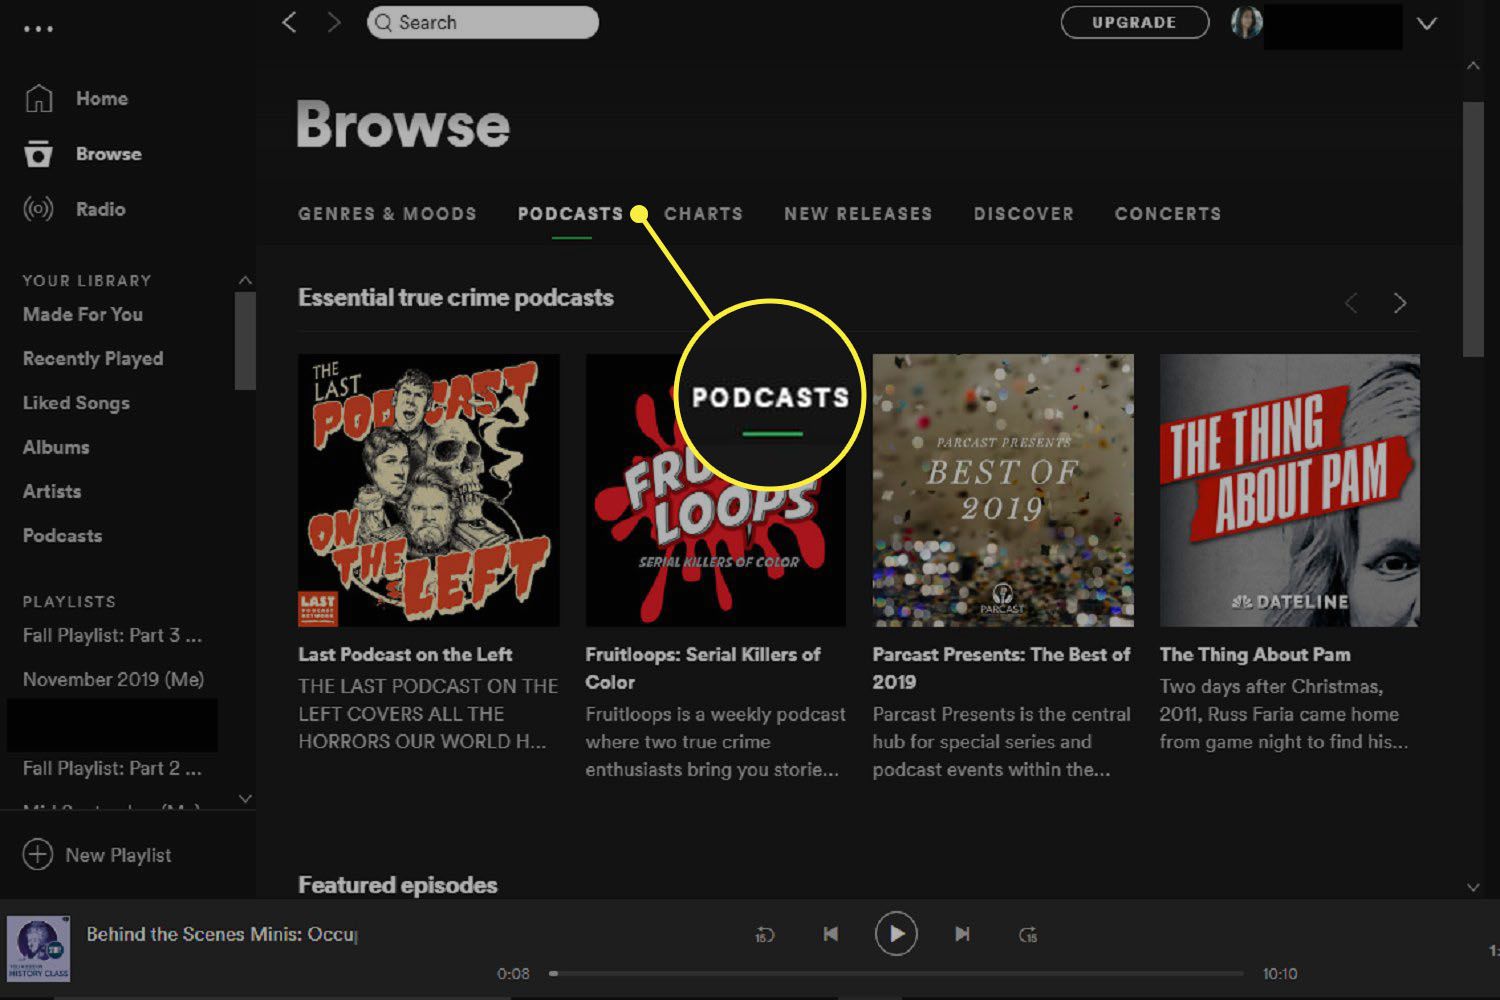 Podcasts-pagina onder Browse-venster in Spotify voor Windows.